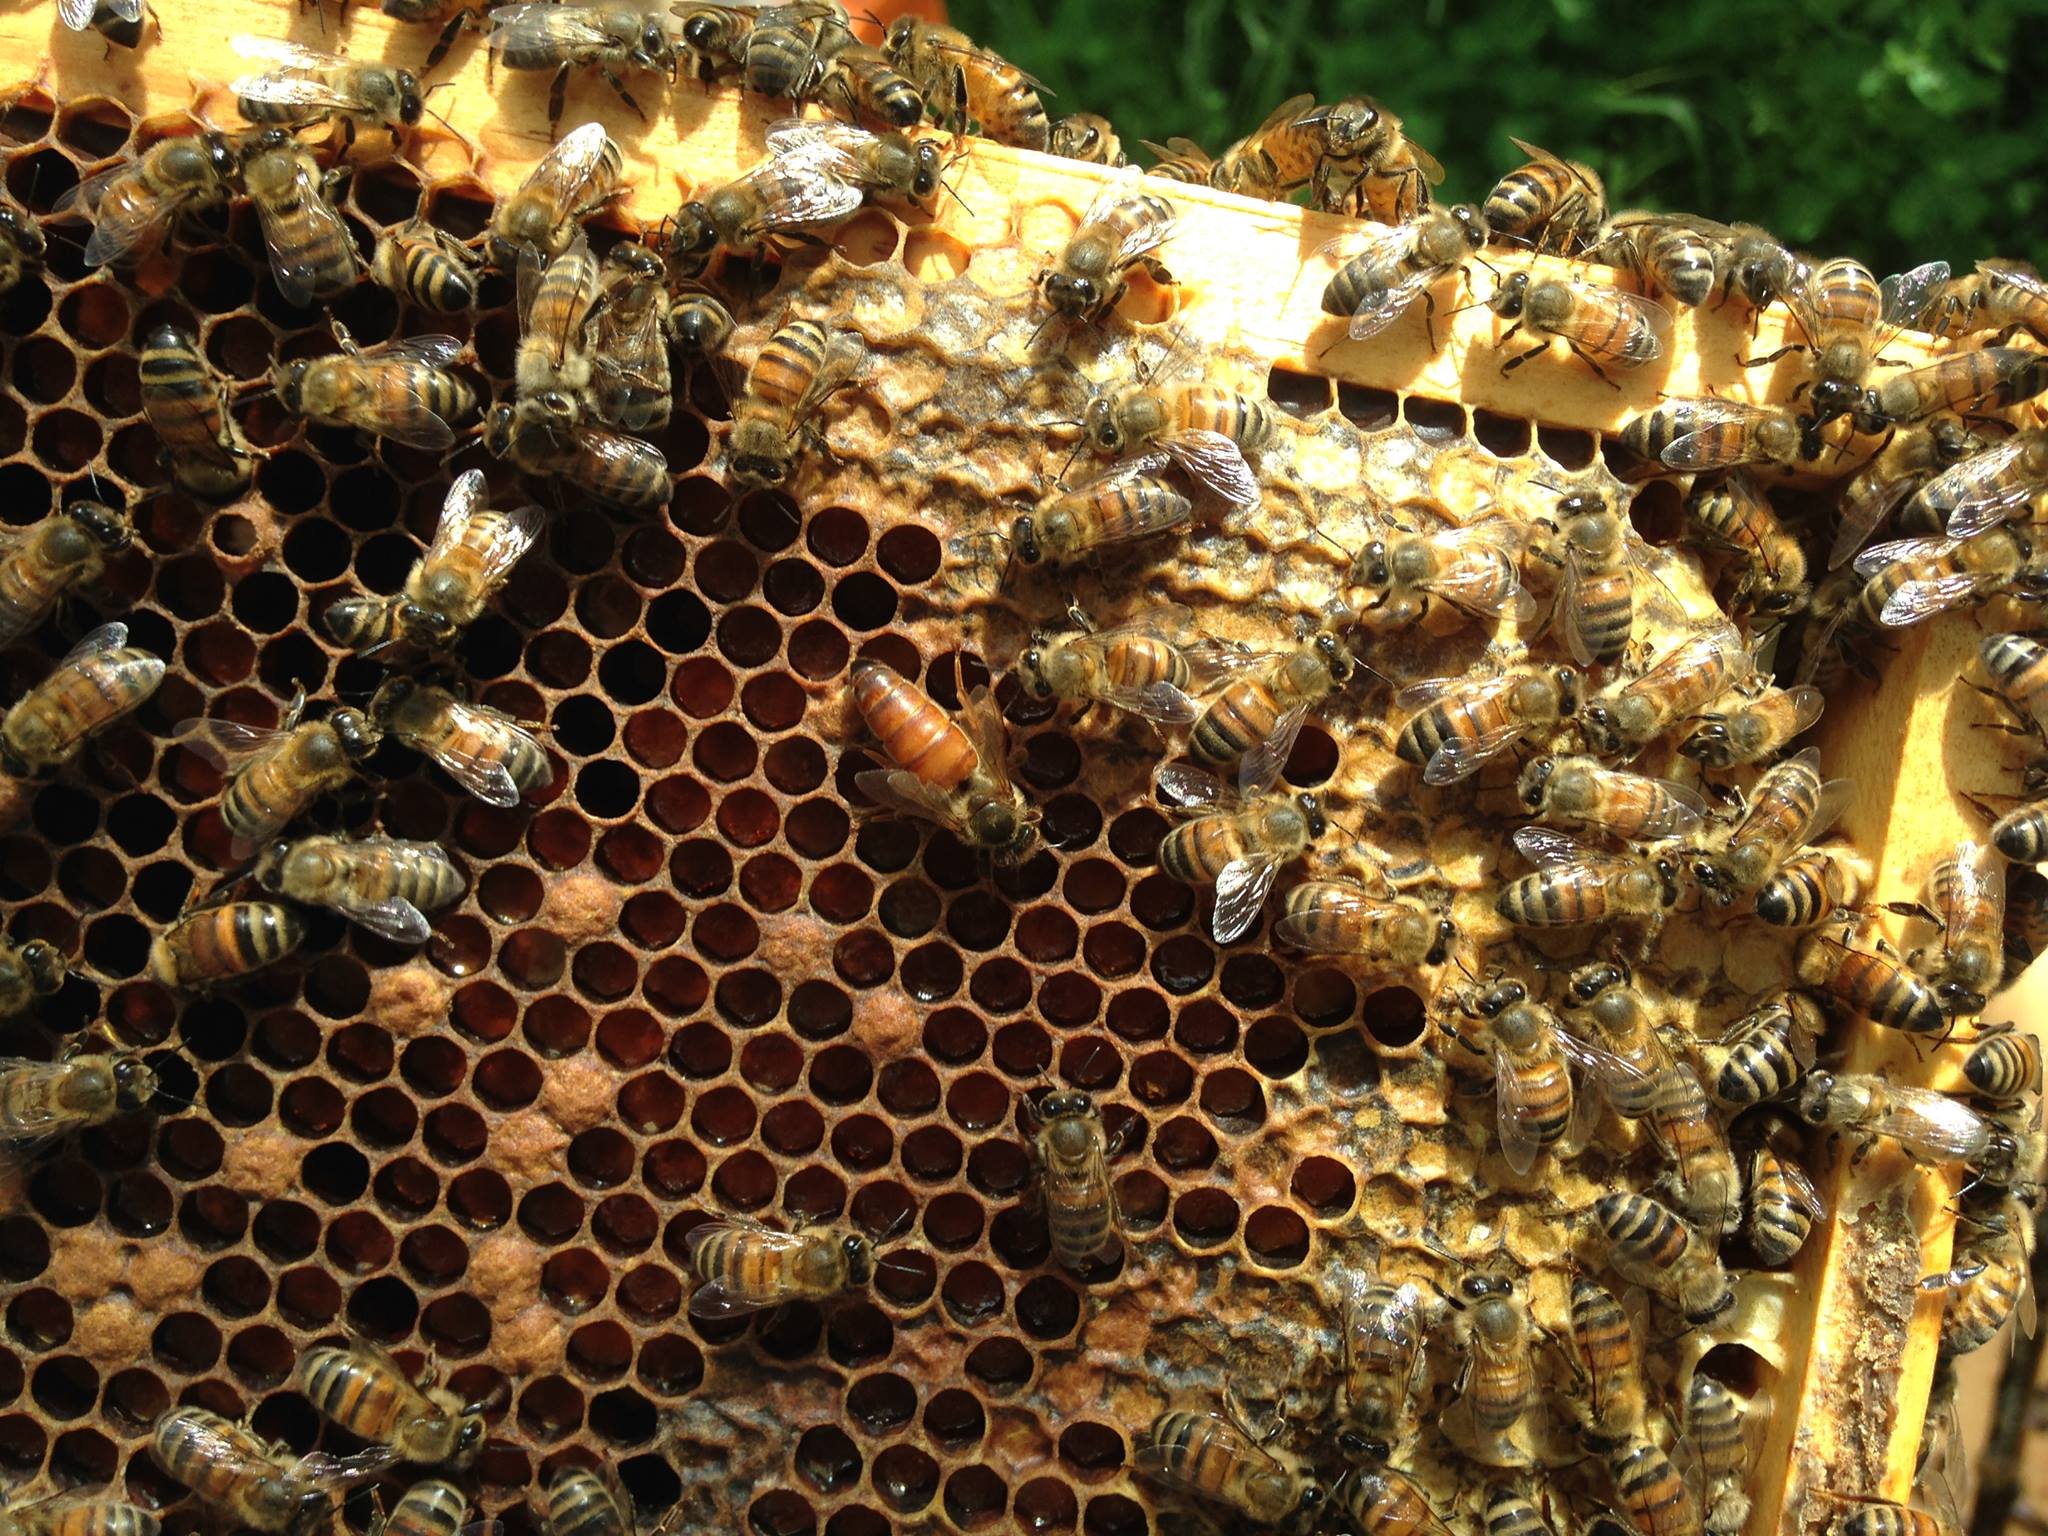 Apiary coming to OWU, bees welcome